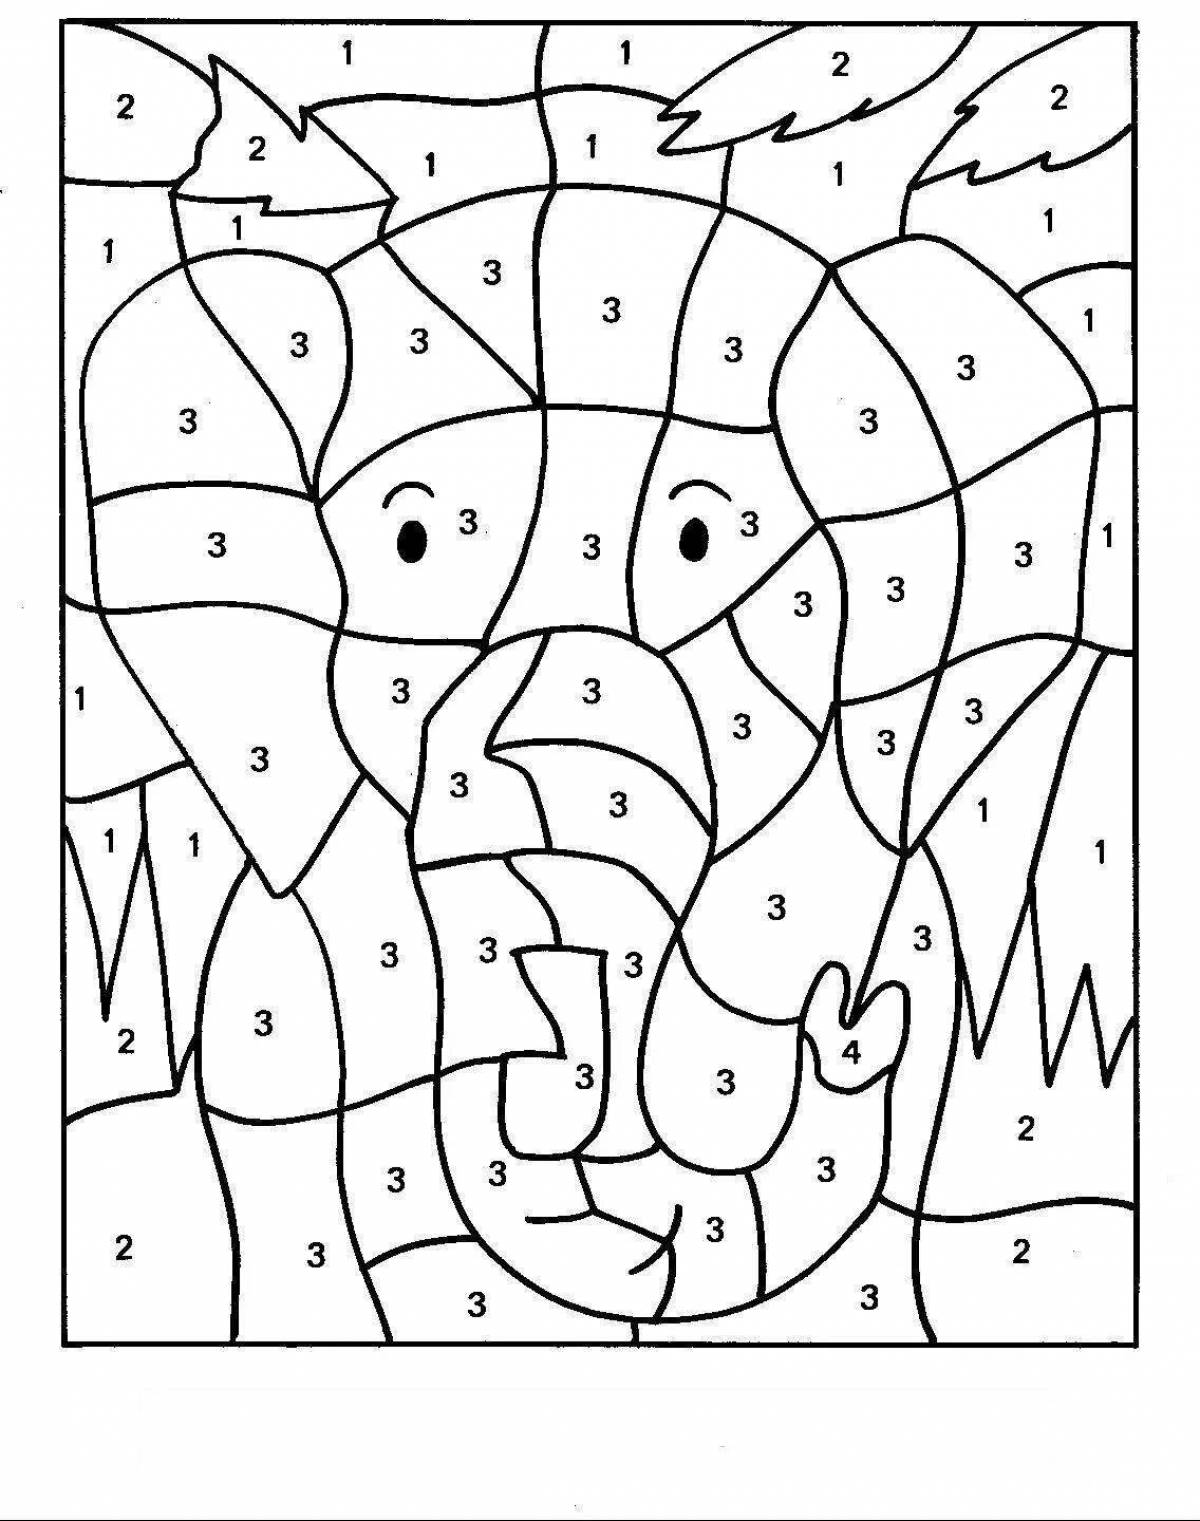 Easy-by-numbers stimulating coloring book